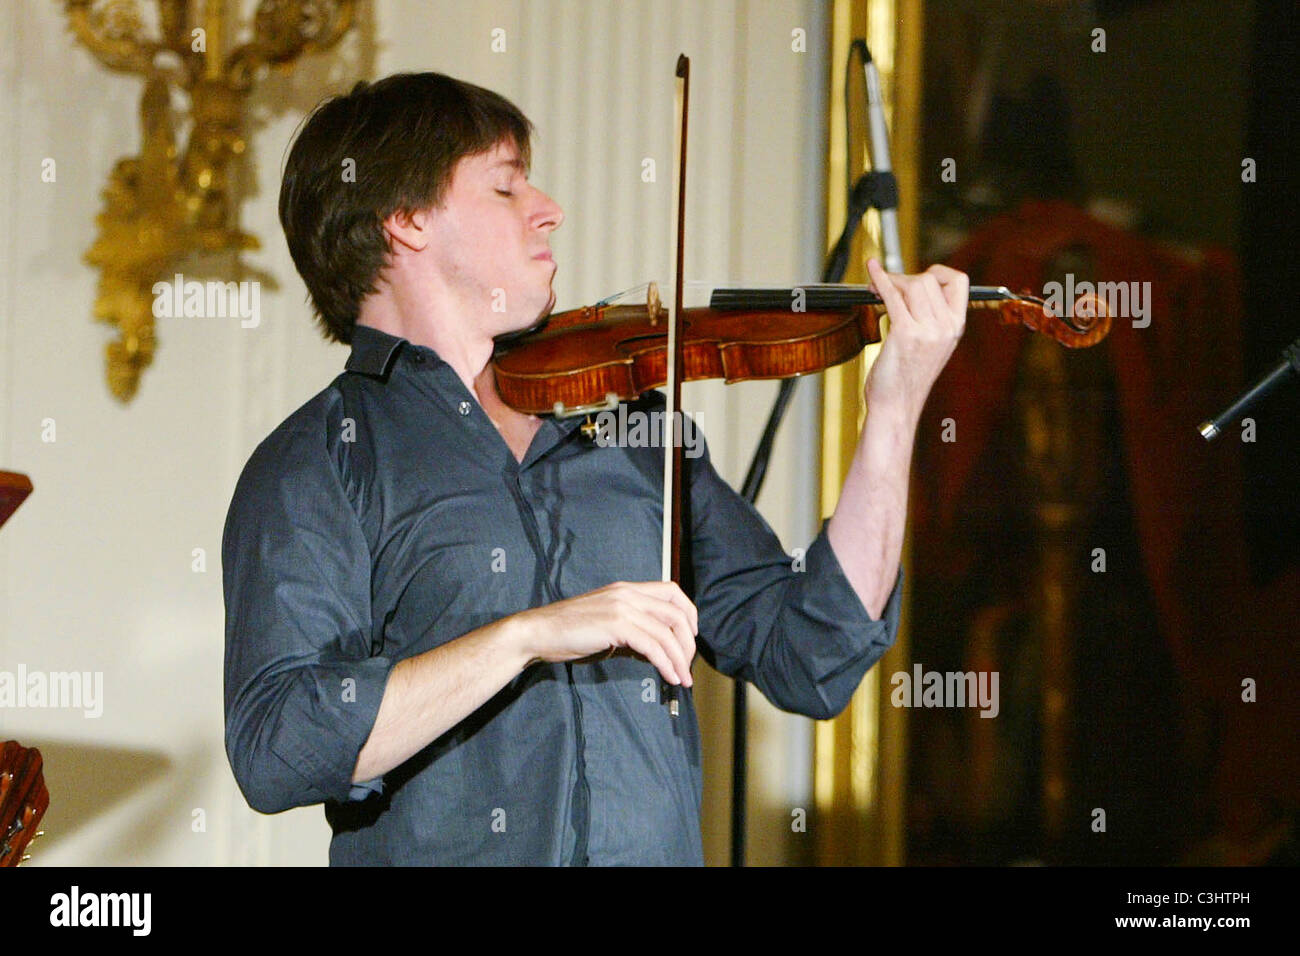 Joshua Bell performs at a Classical Music Student Workshop Concert in the East Room of the White House Washington DC, USA - Stock Photo